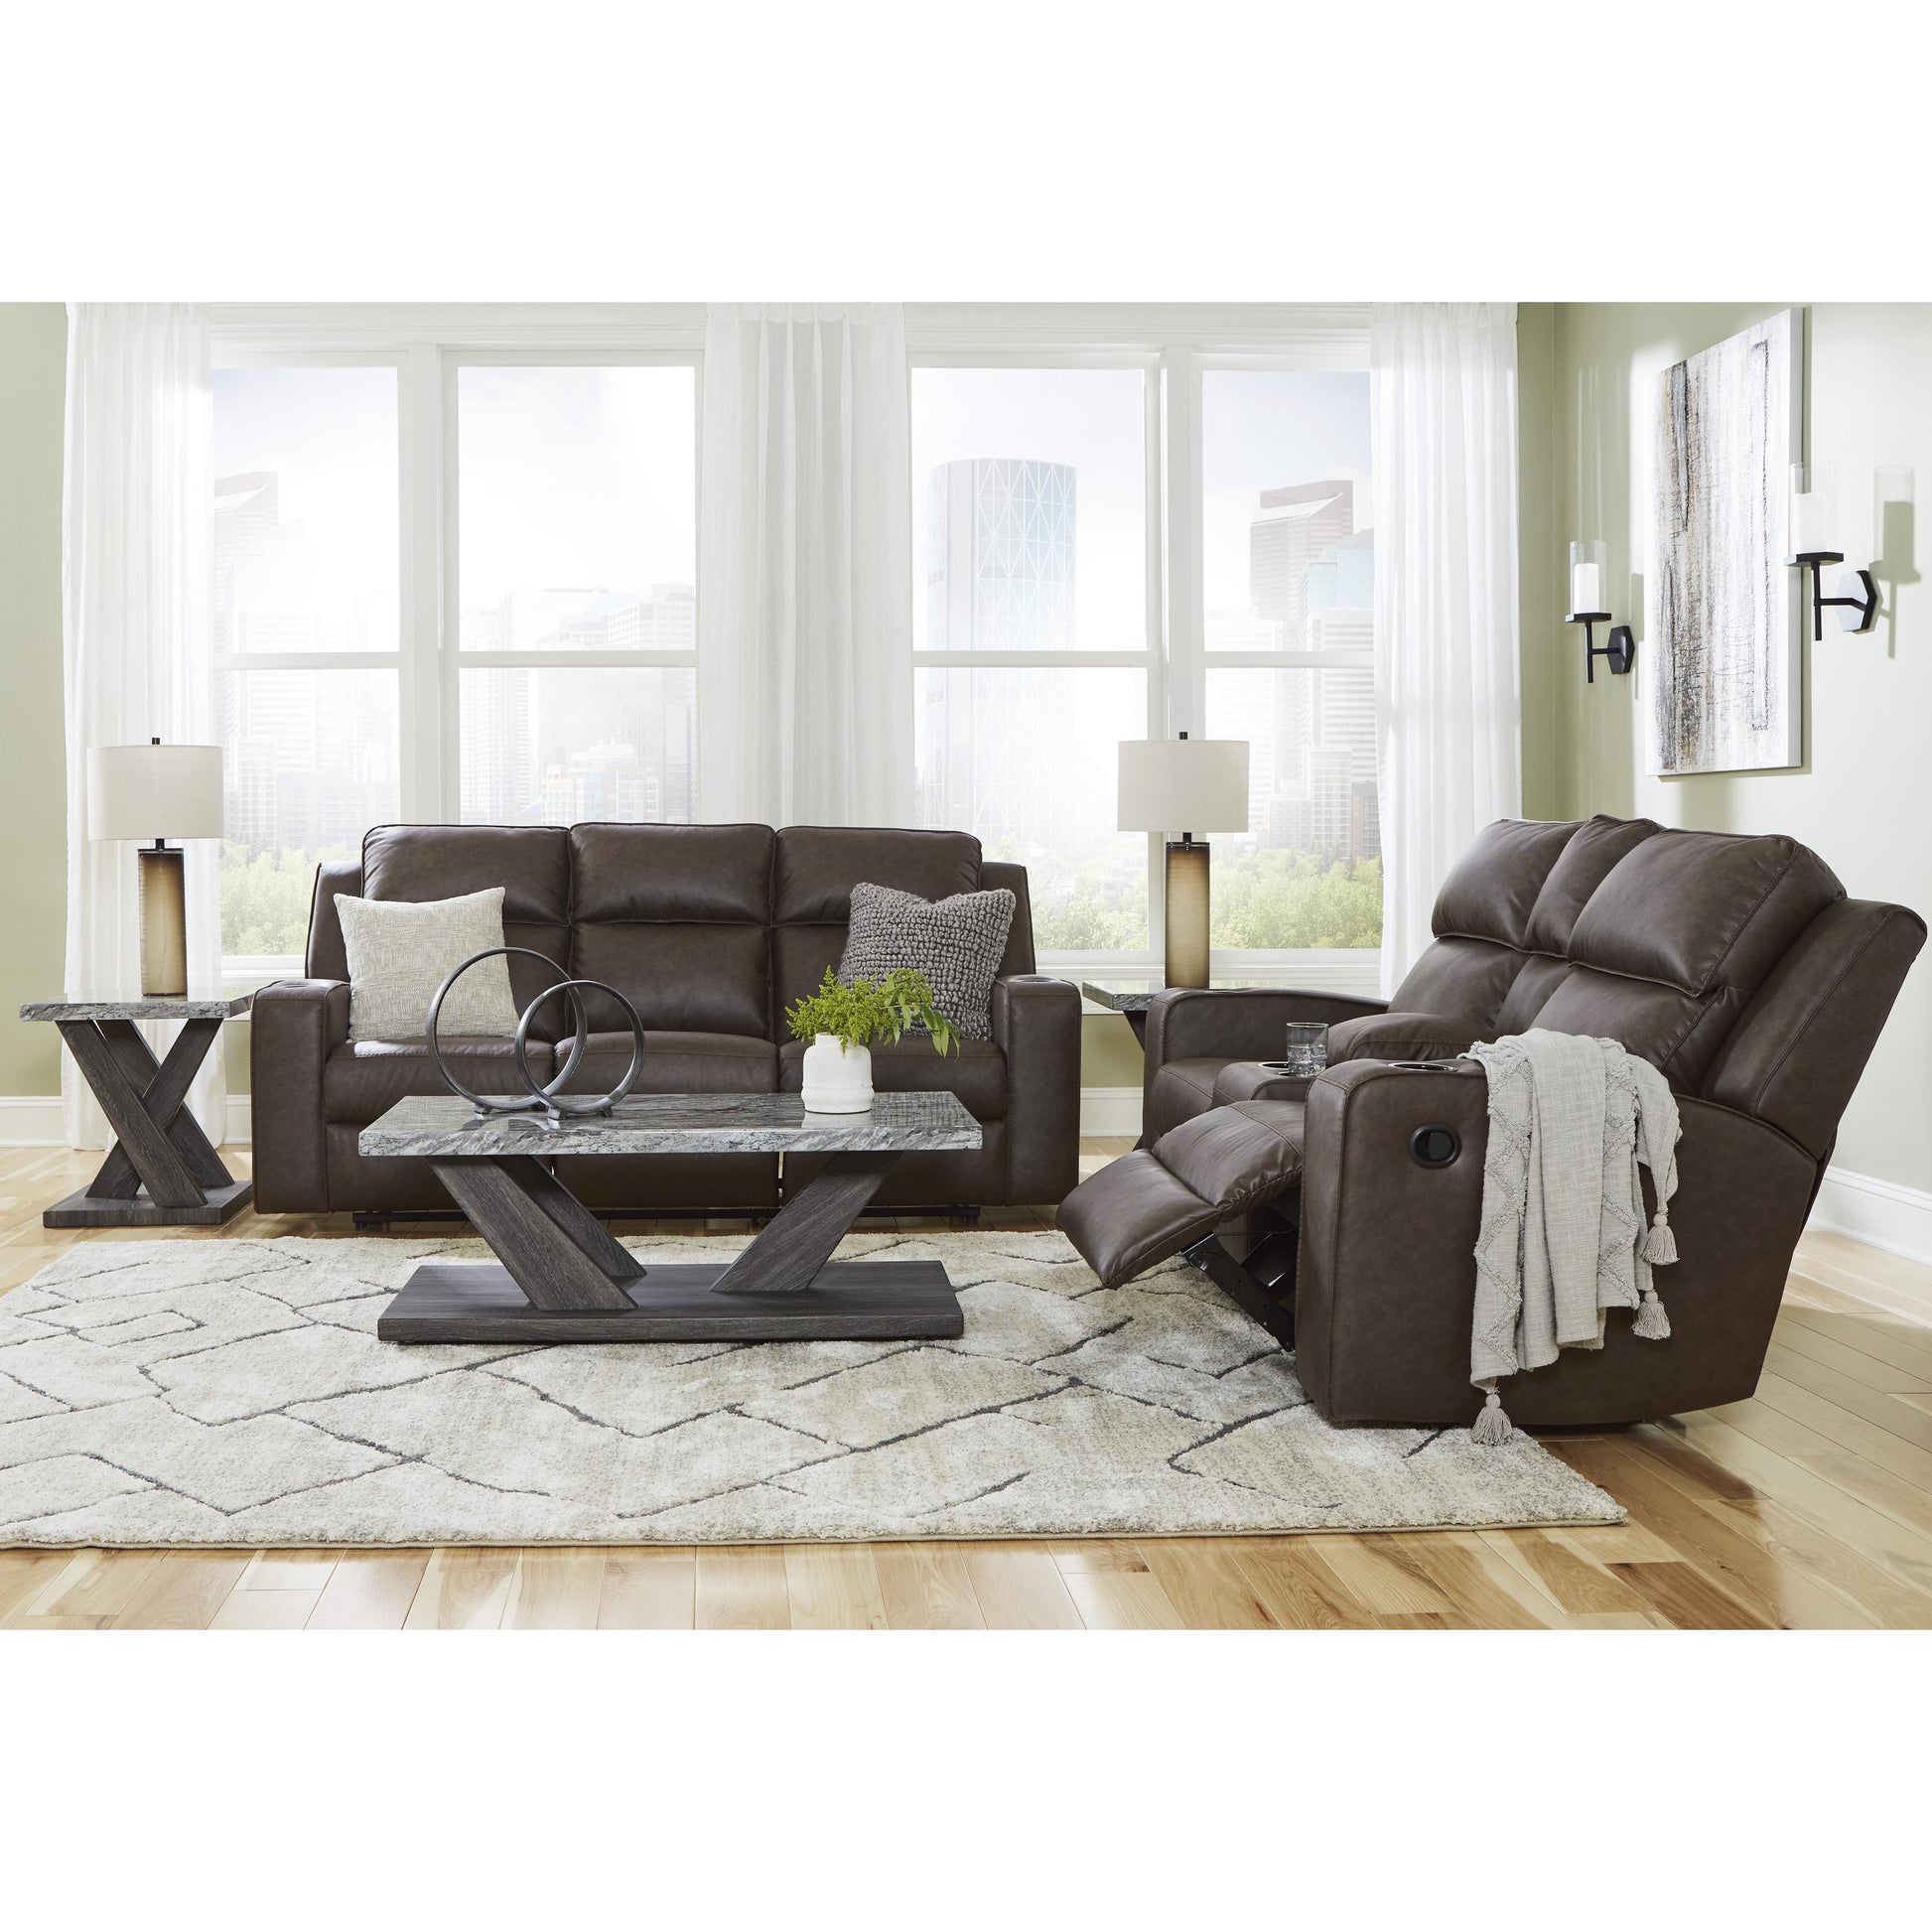 Signature Design by Ashley Lavenhorne Reclining Leather Look Loveseat 6330694 IMAGE 14